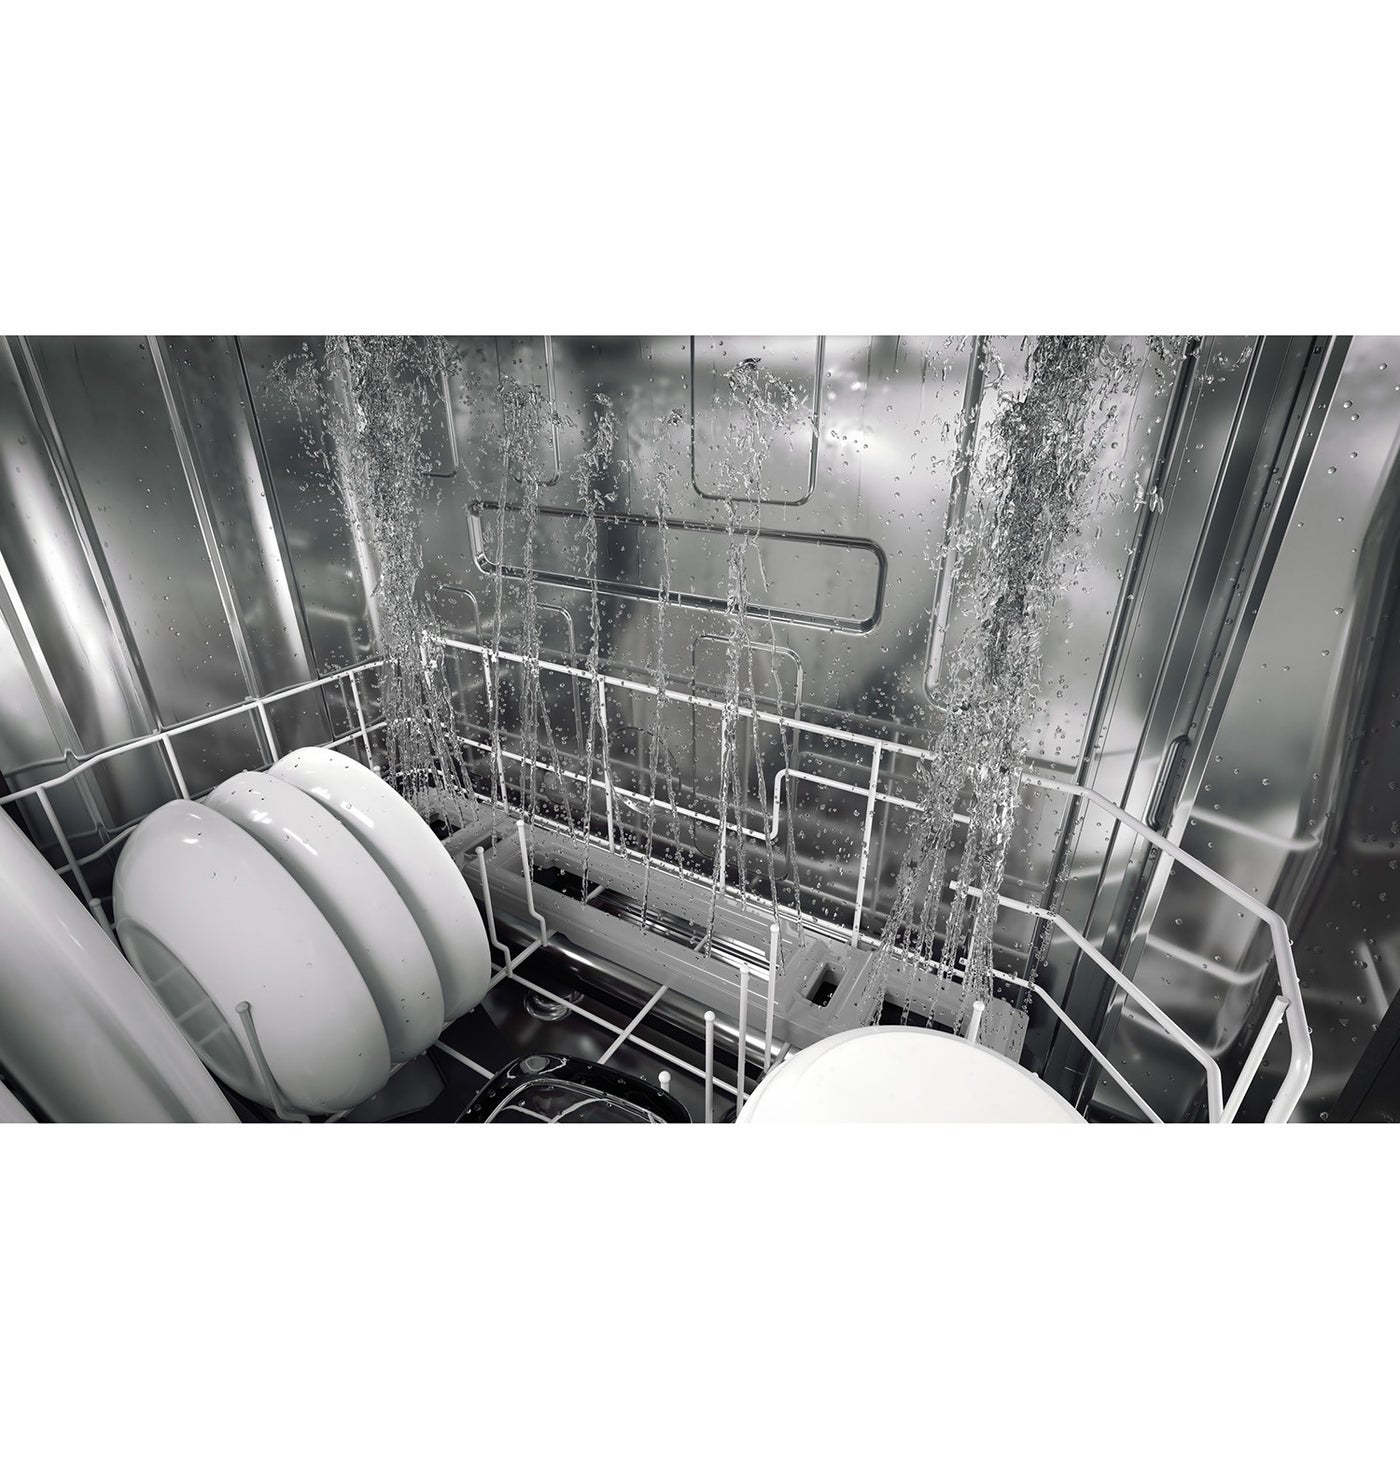 GE Profile Stainless Steel 24" Dishwasher- PDT785SYNFS